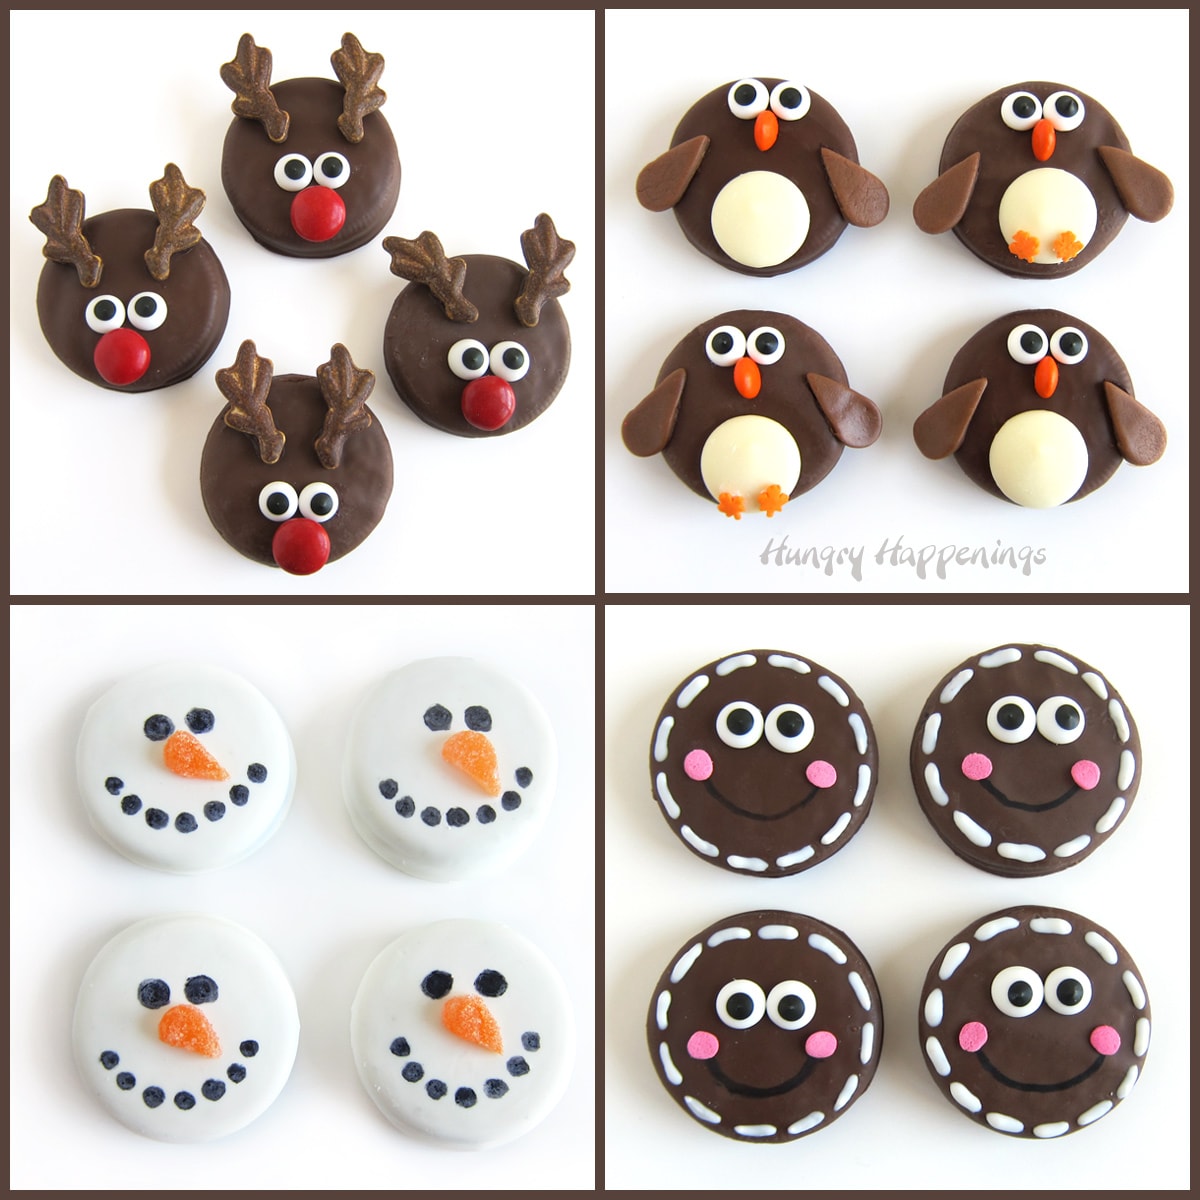 collage of Christmas cookie images including Reindeer OREOs, Penguin OREOs, Snowmen OREOs, and Gingerbread OREOs.